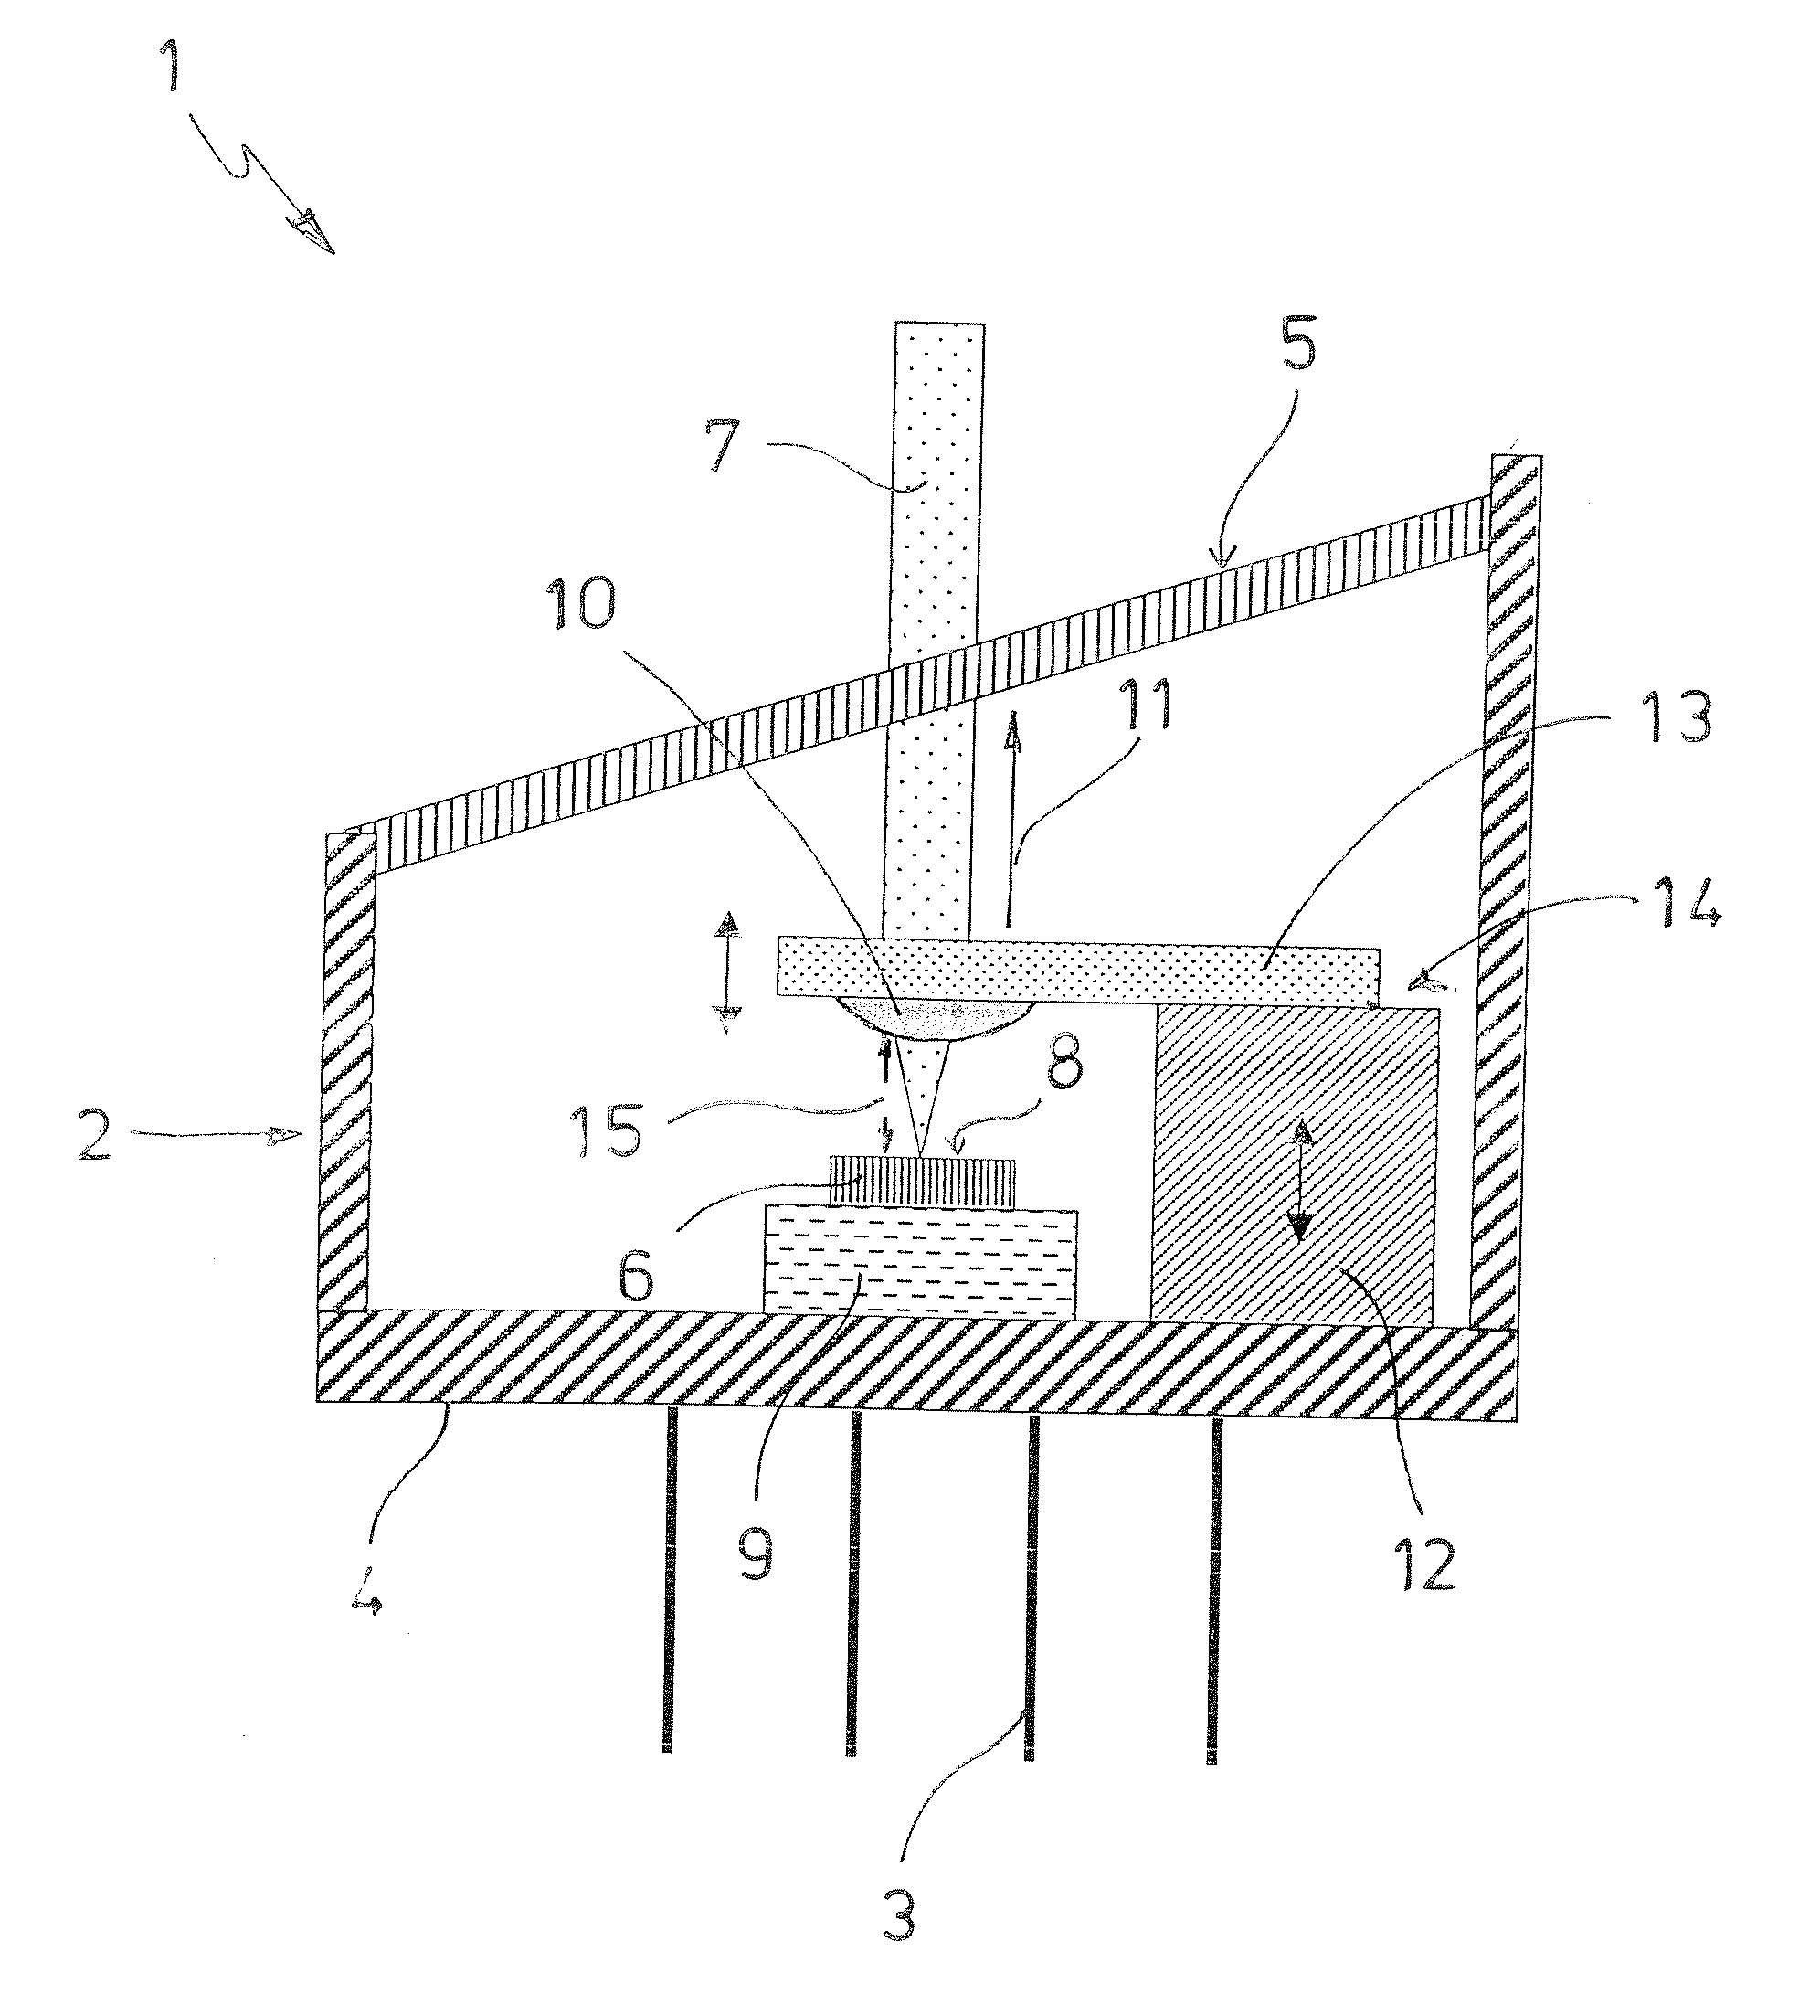 Laser diode structure with reduced interference signals